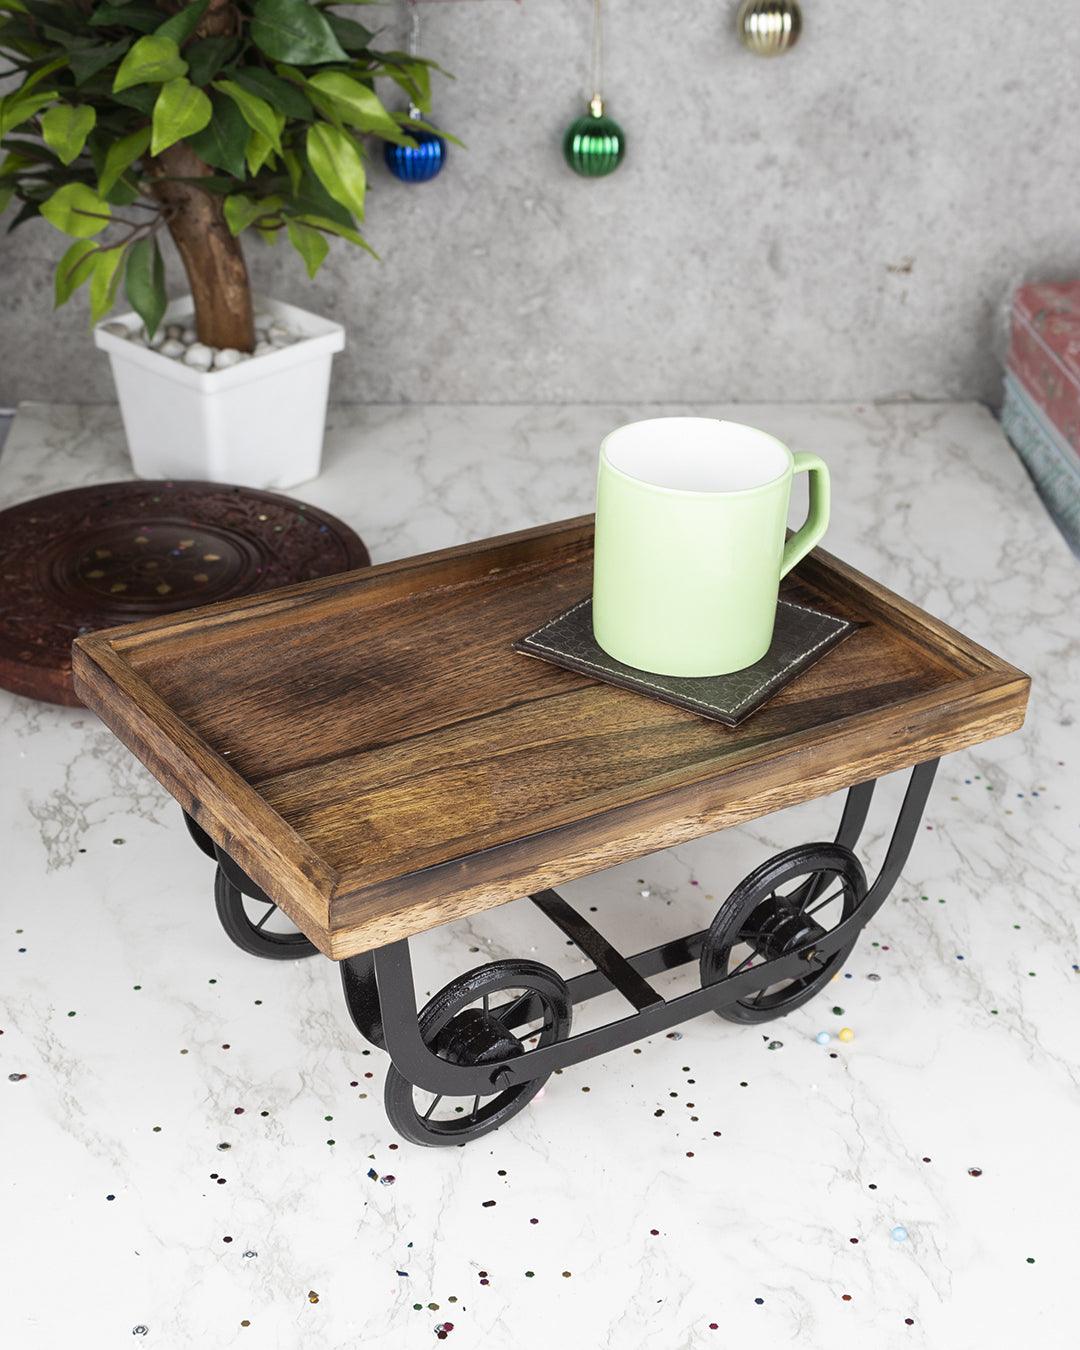 Wooden Serving Tray/Kart/Platters Thela for 'Dining Table"